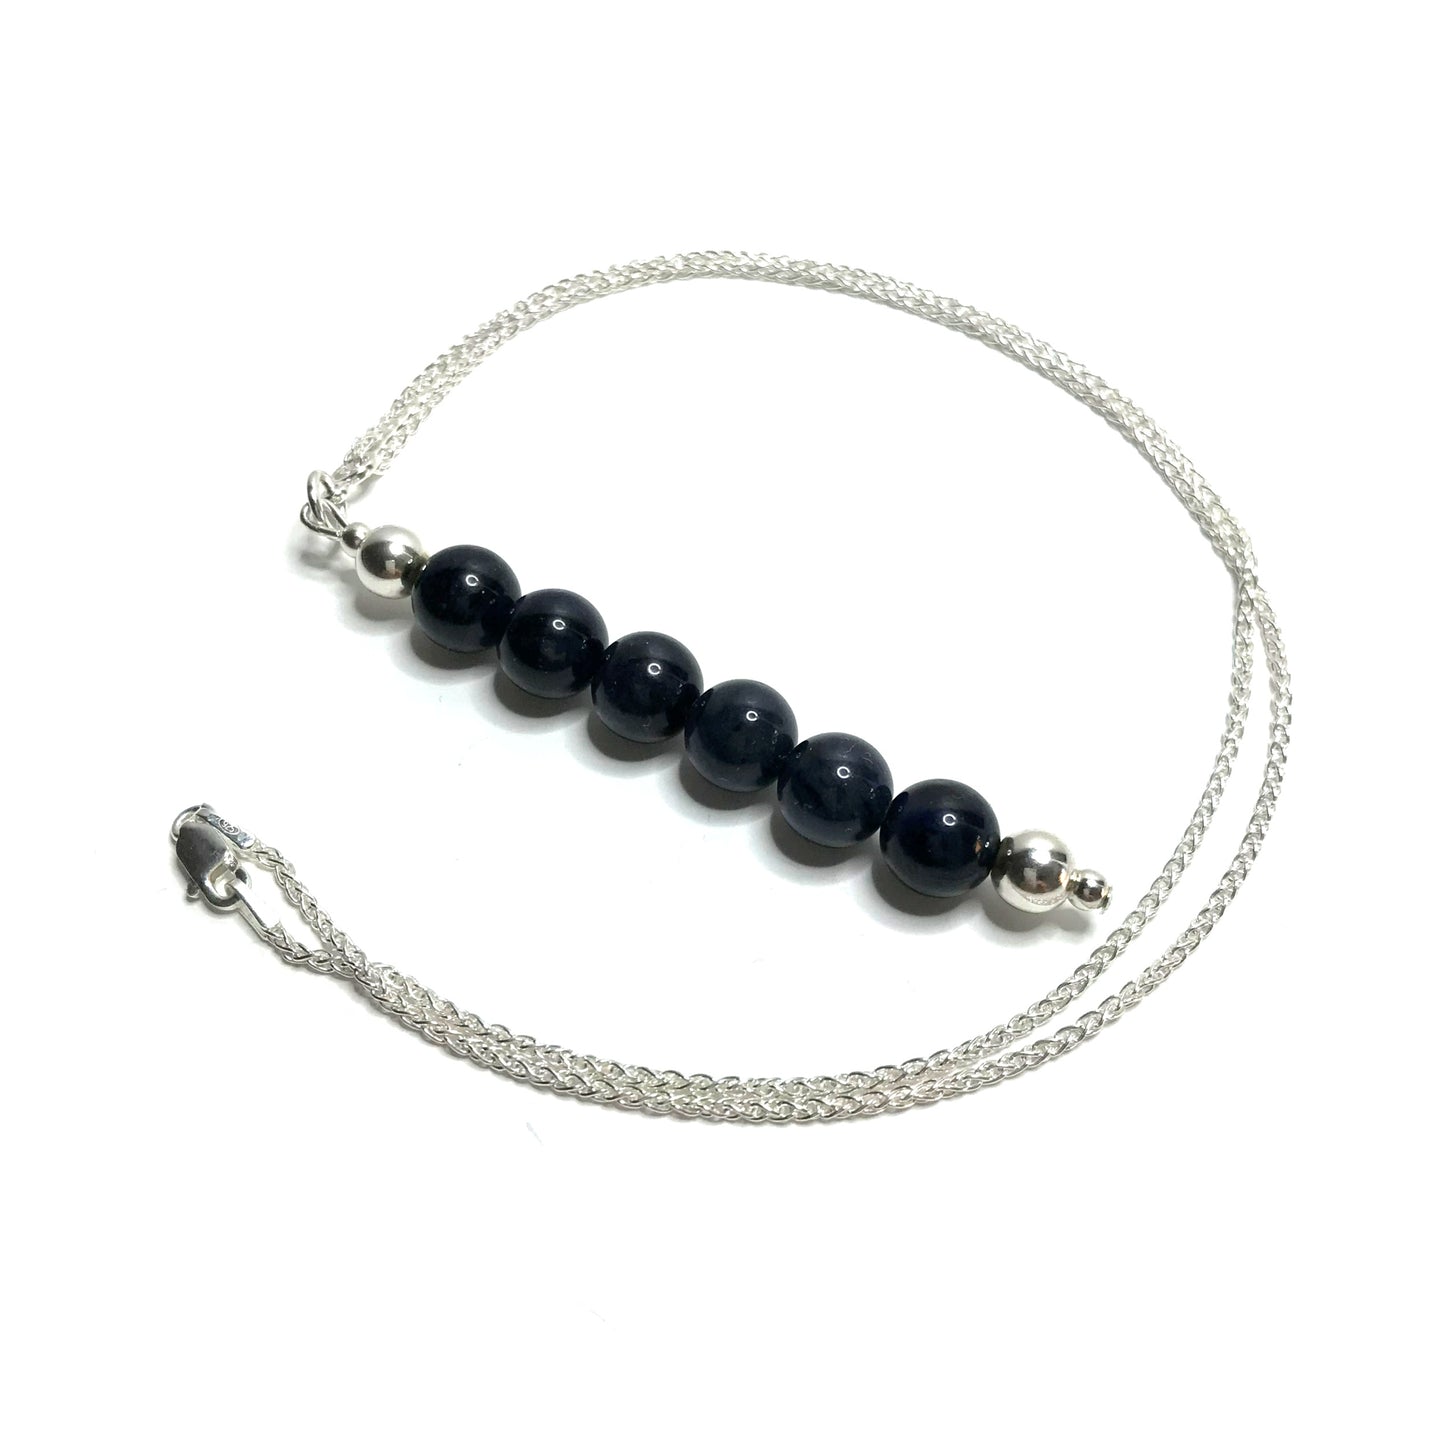 Dumortierite crystal pendant on a silver chain